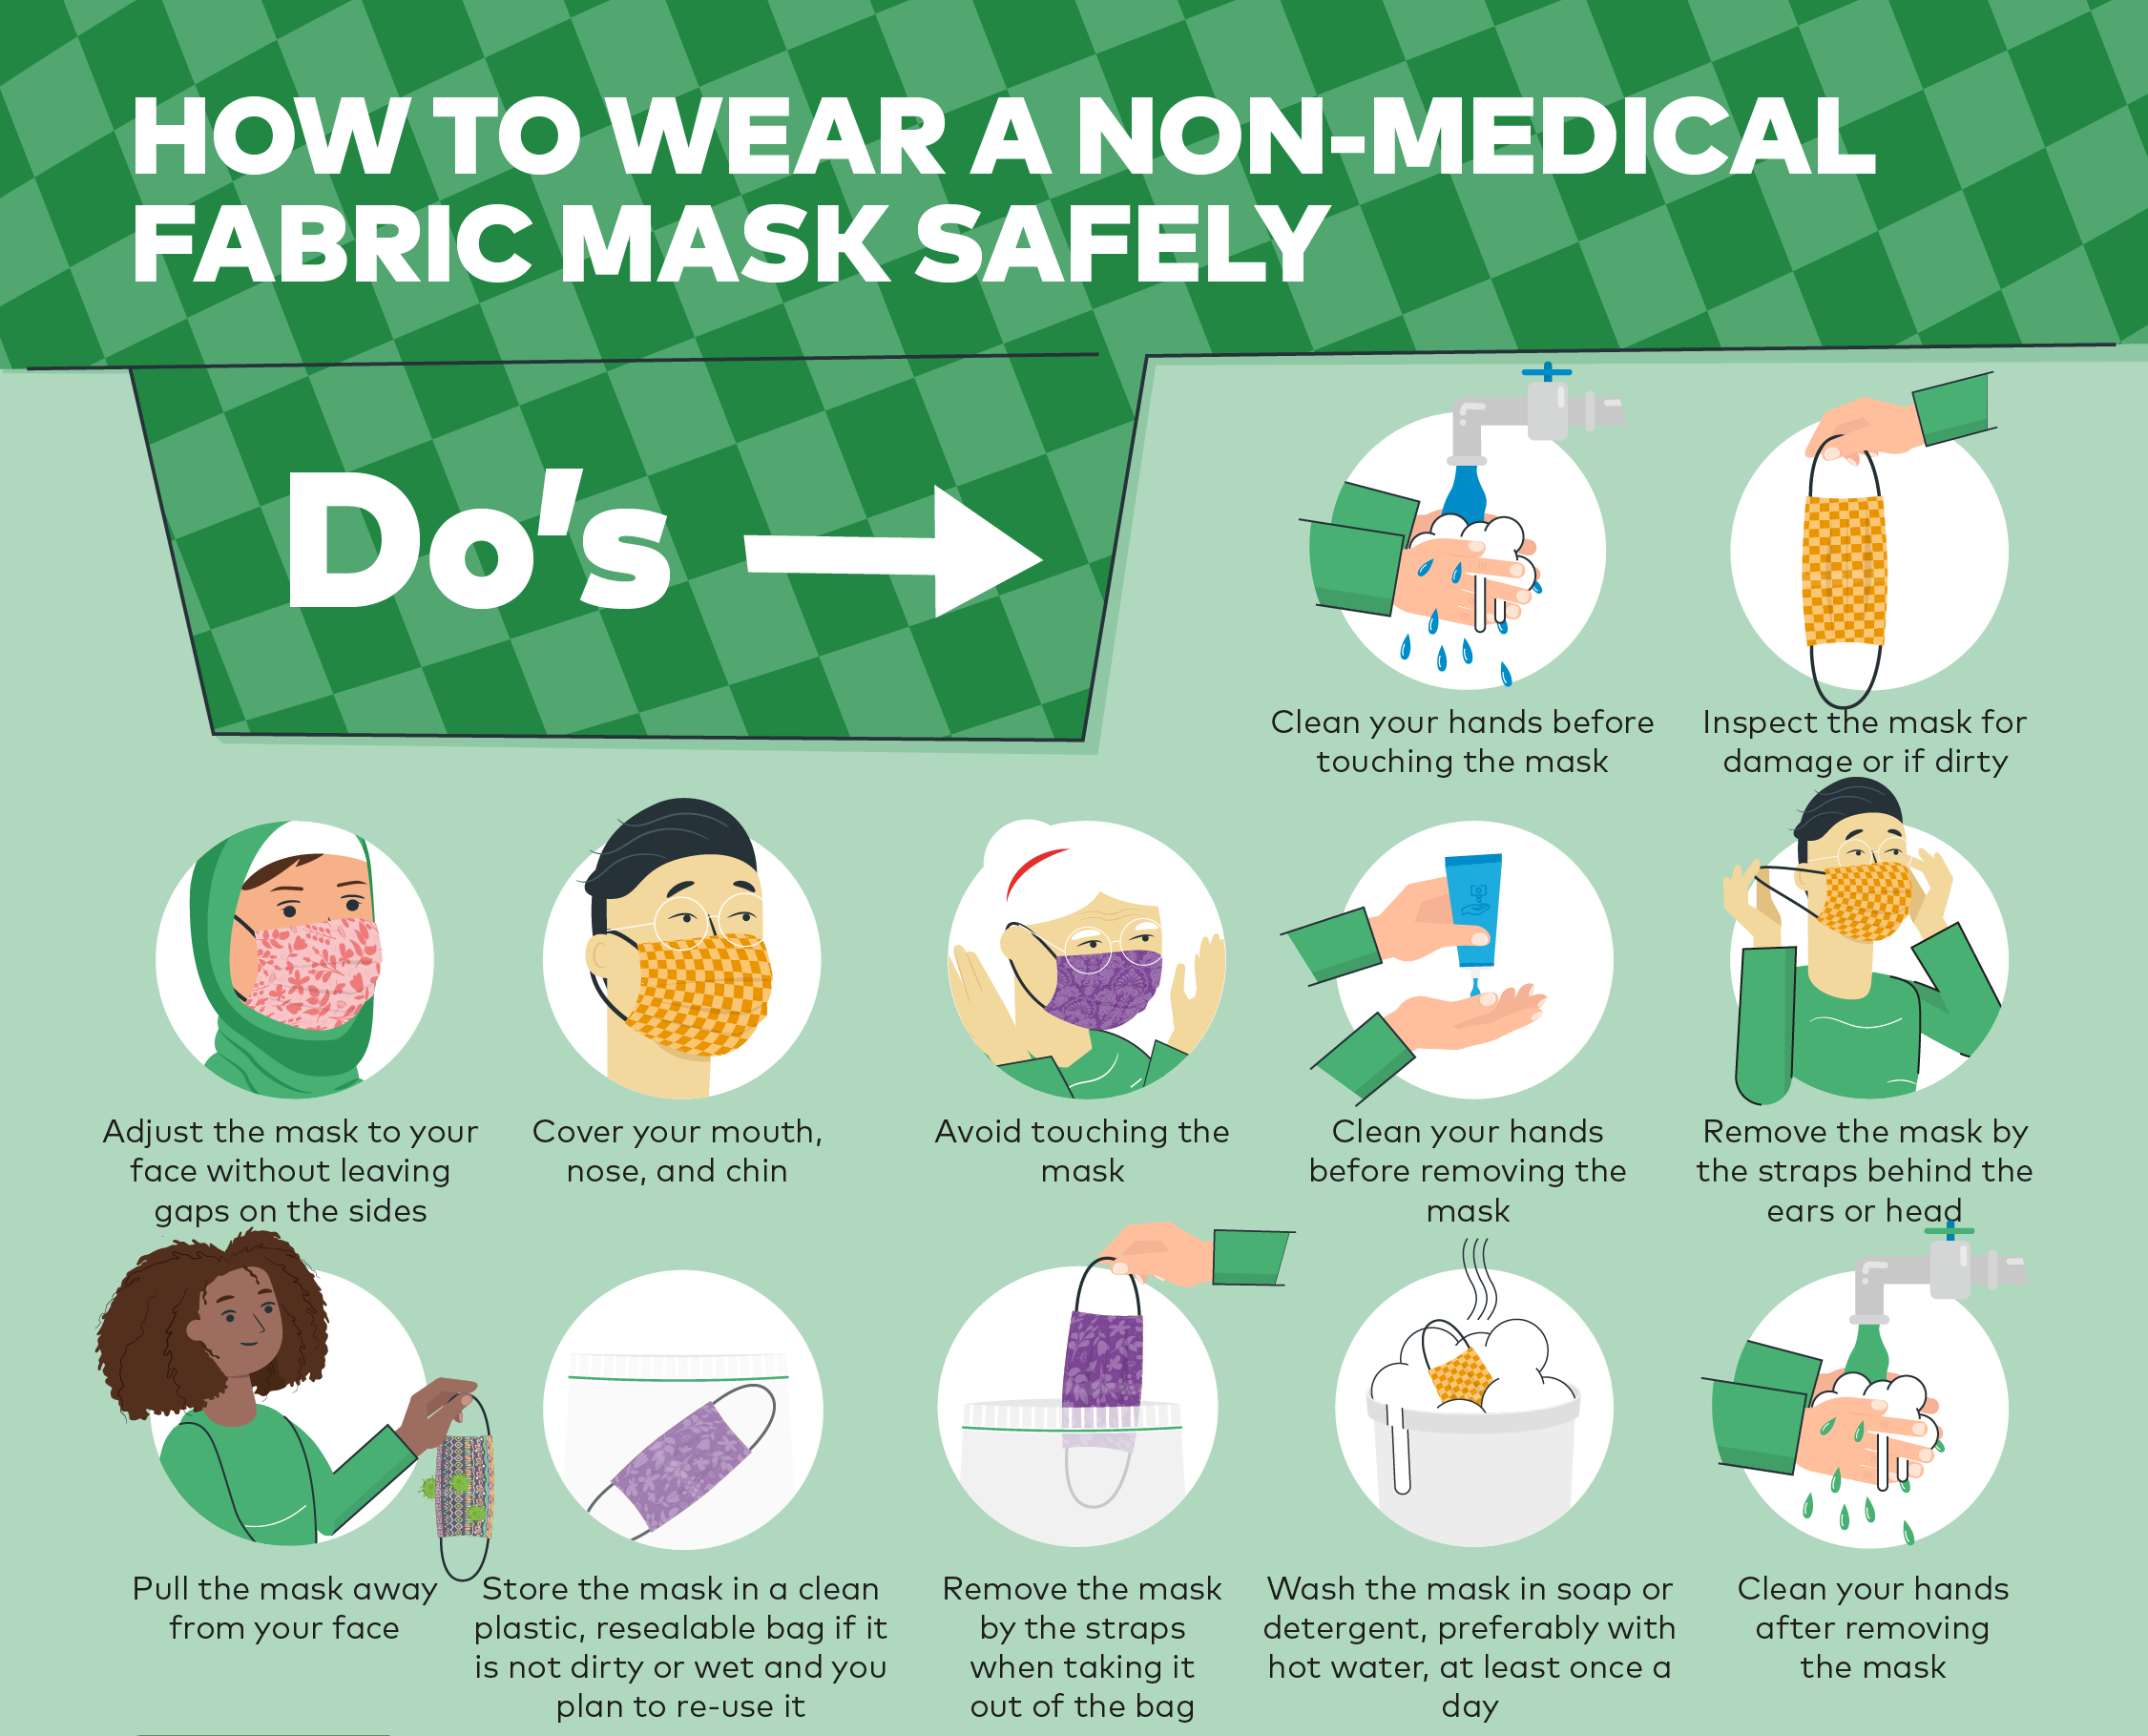 Tips to wear fabric masks safely